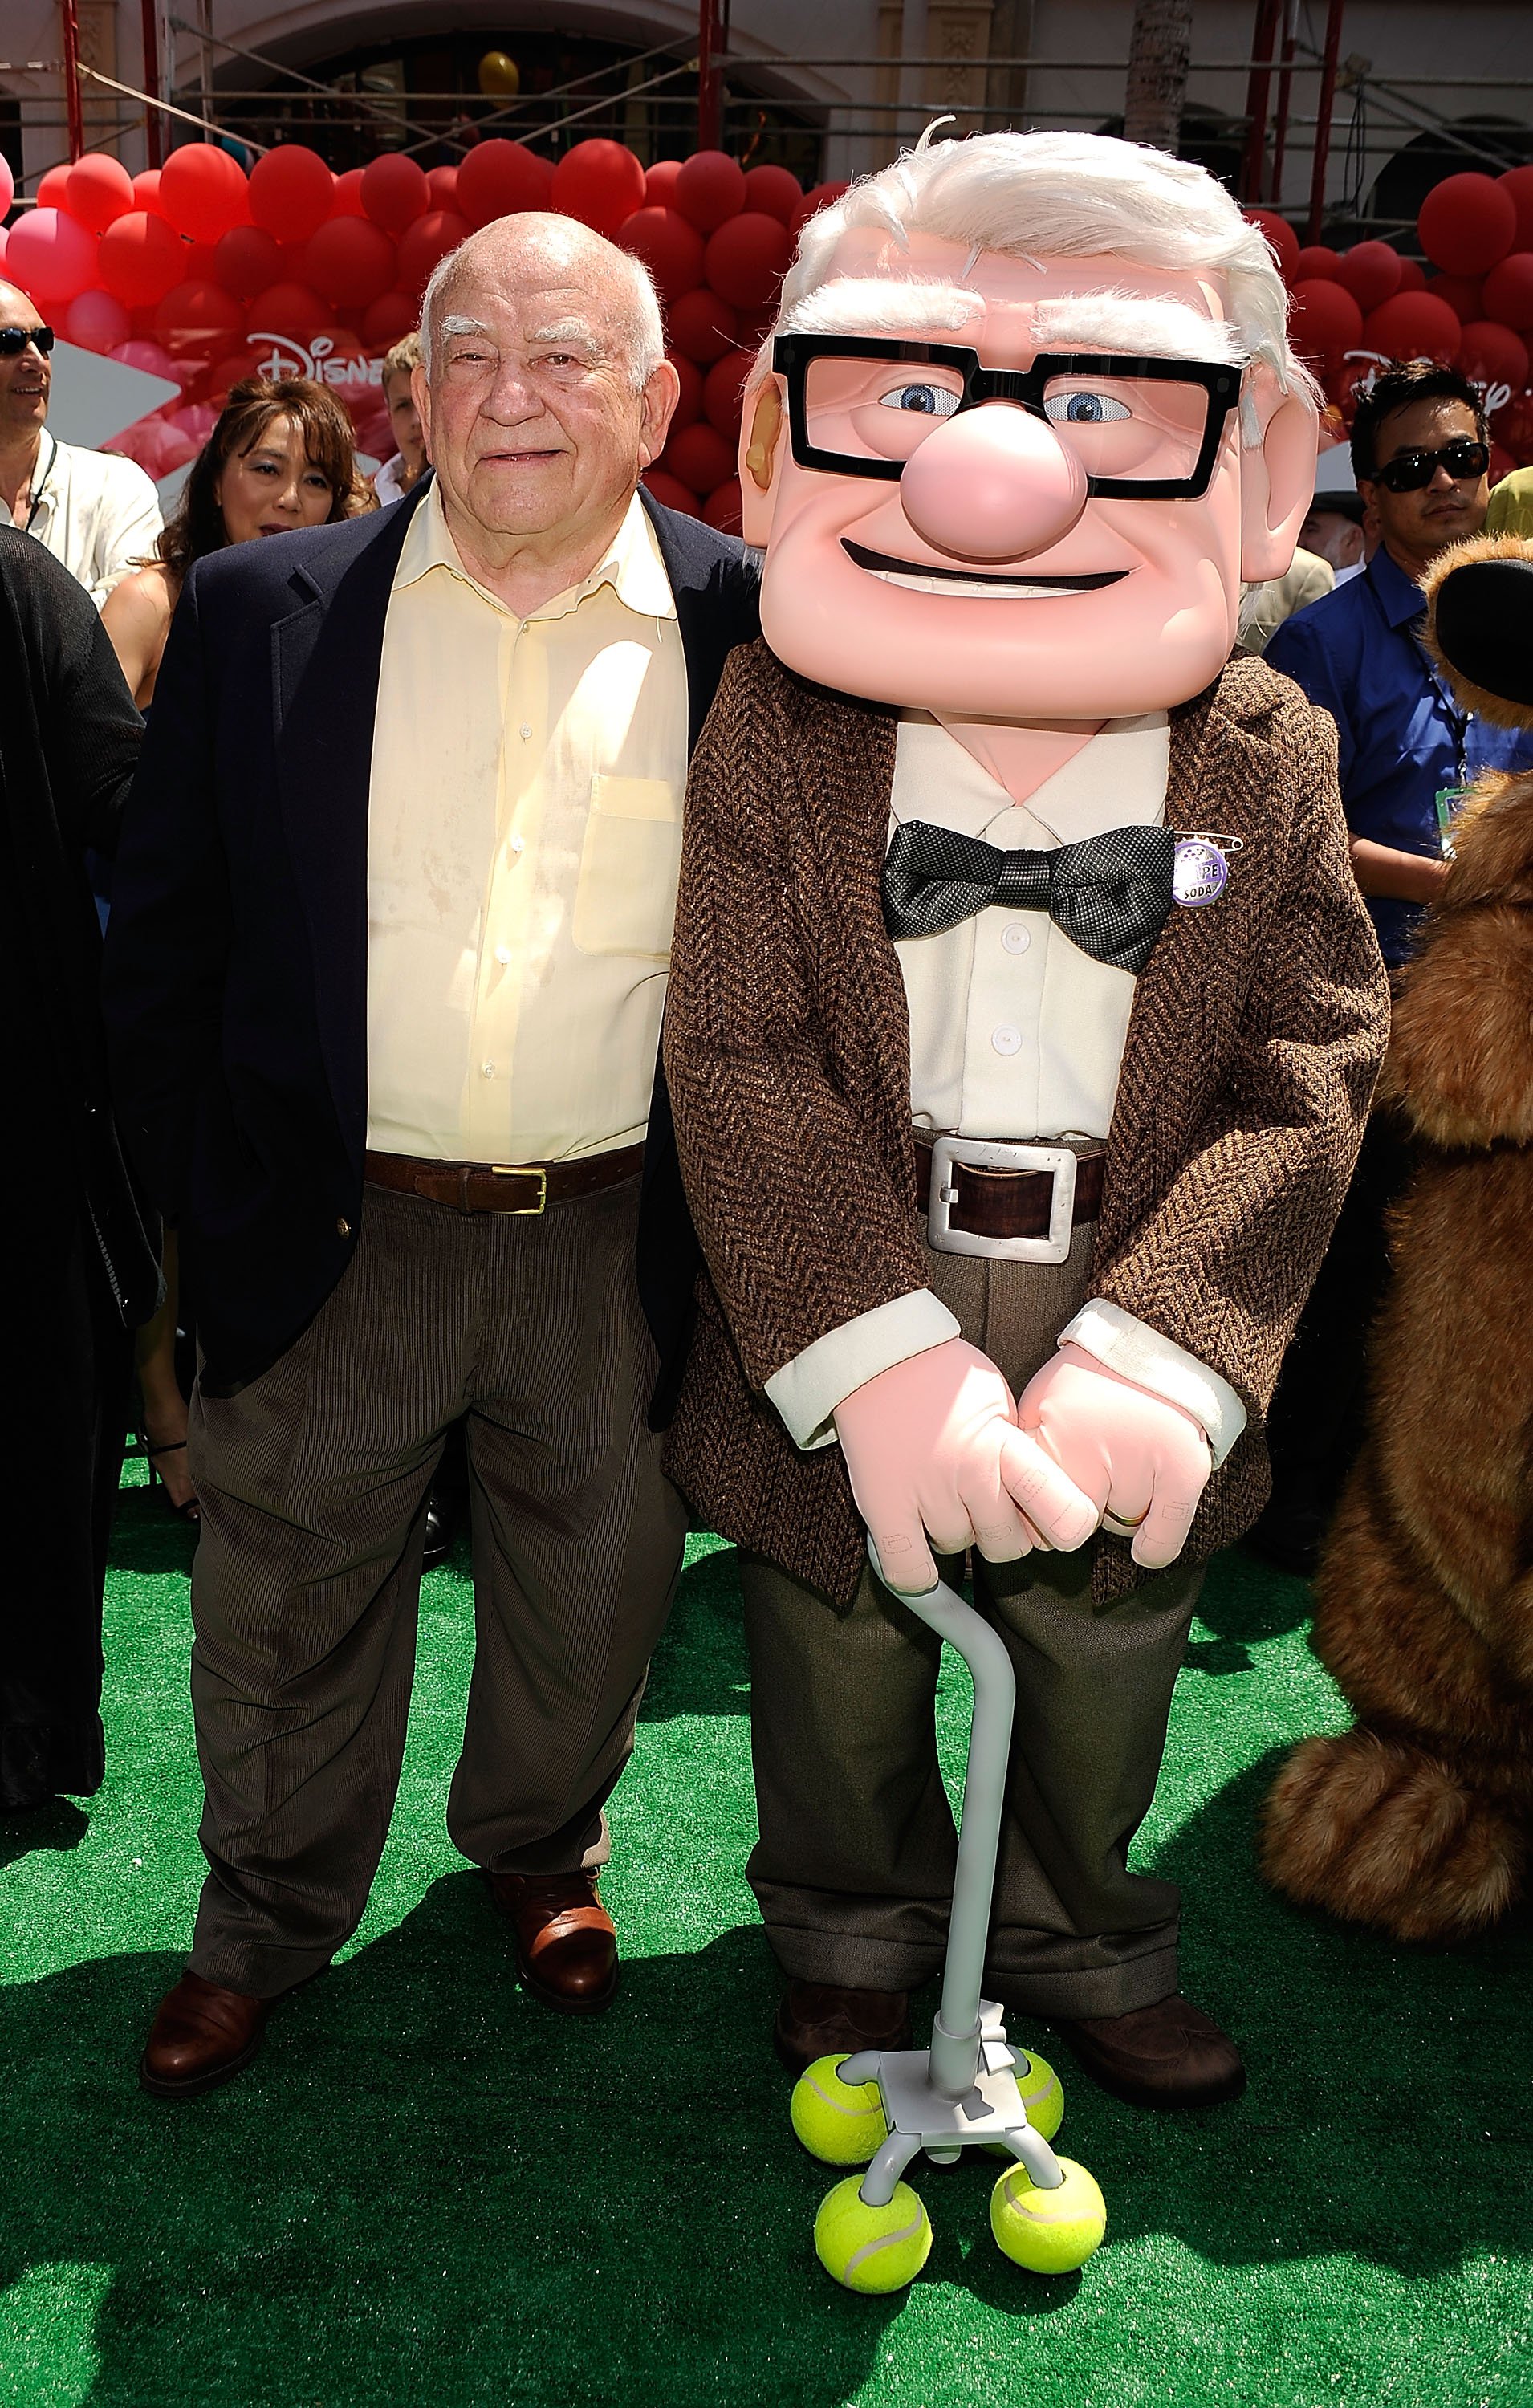 Ed Asner standing next to the character he voiced in the movie 'Up' during the premiere in 2009